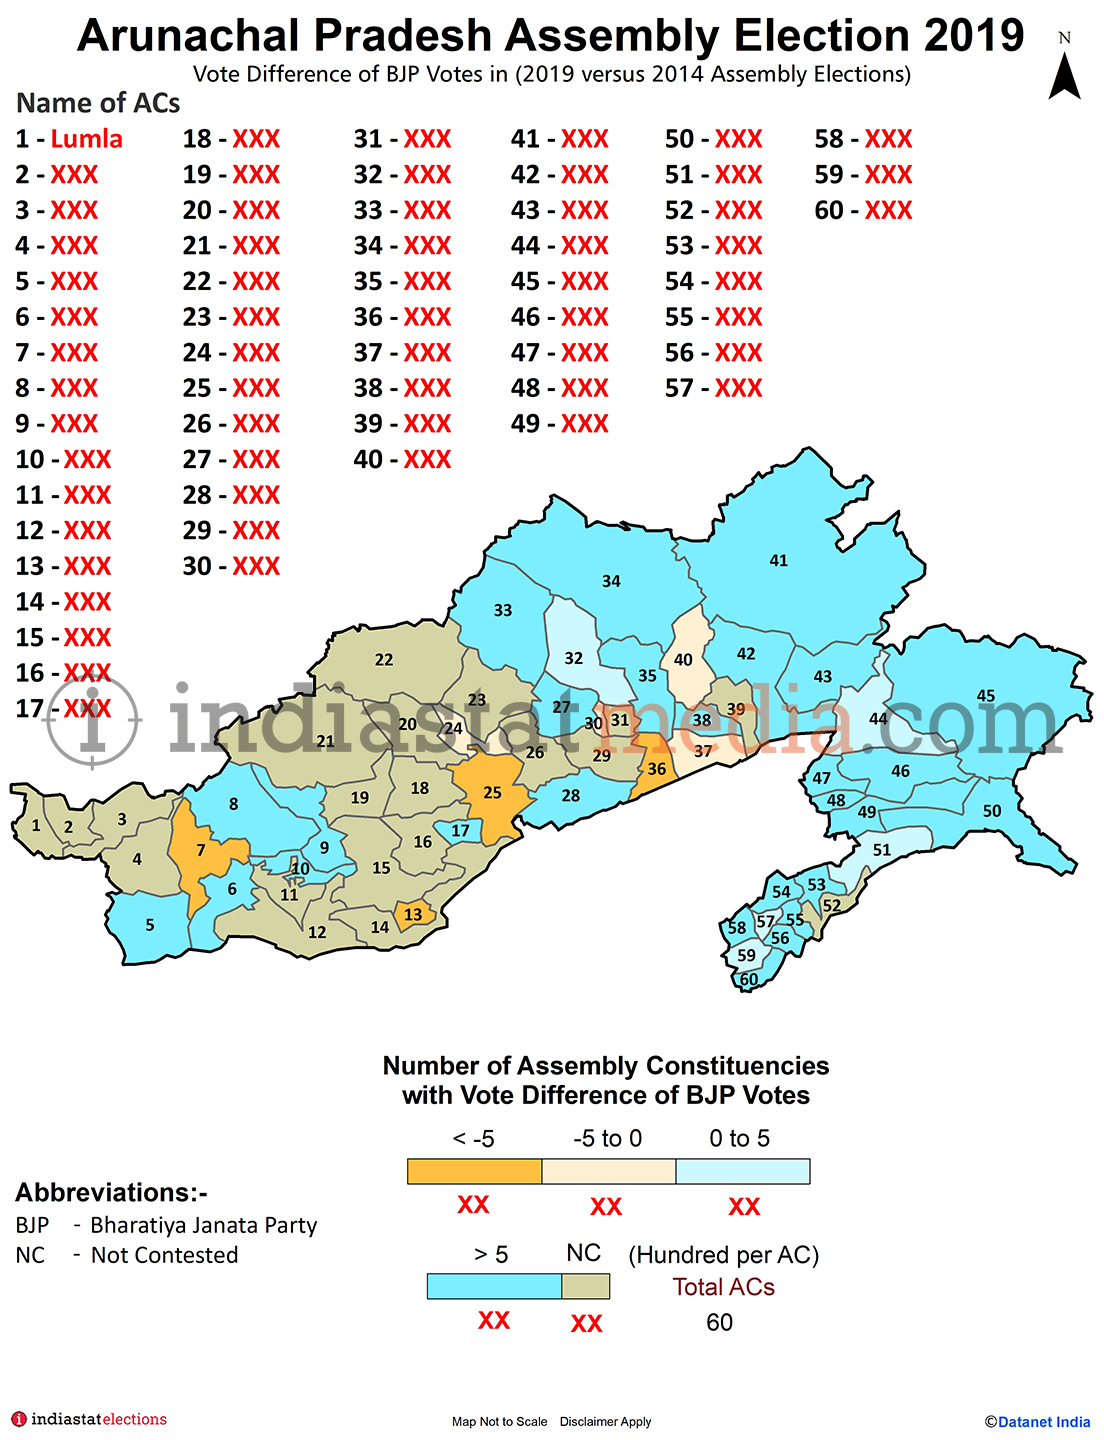 Assembly Constituencies with Vote Difference of BJP Votes in Arunachal Pradesh (Assembly Elections - 2014 & 2019)